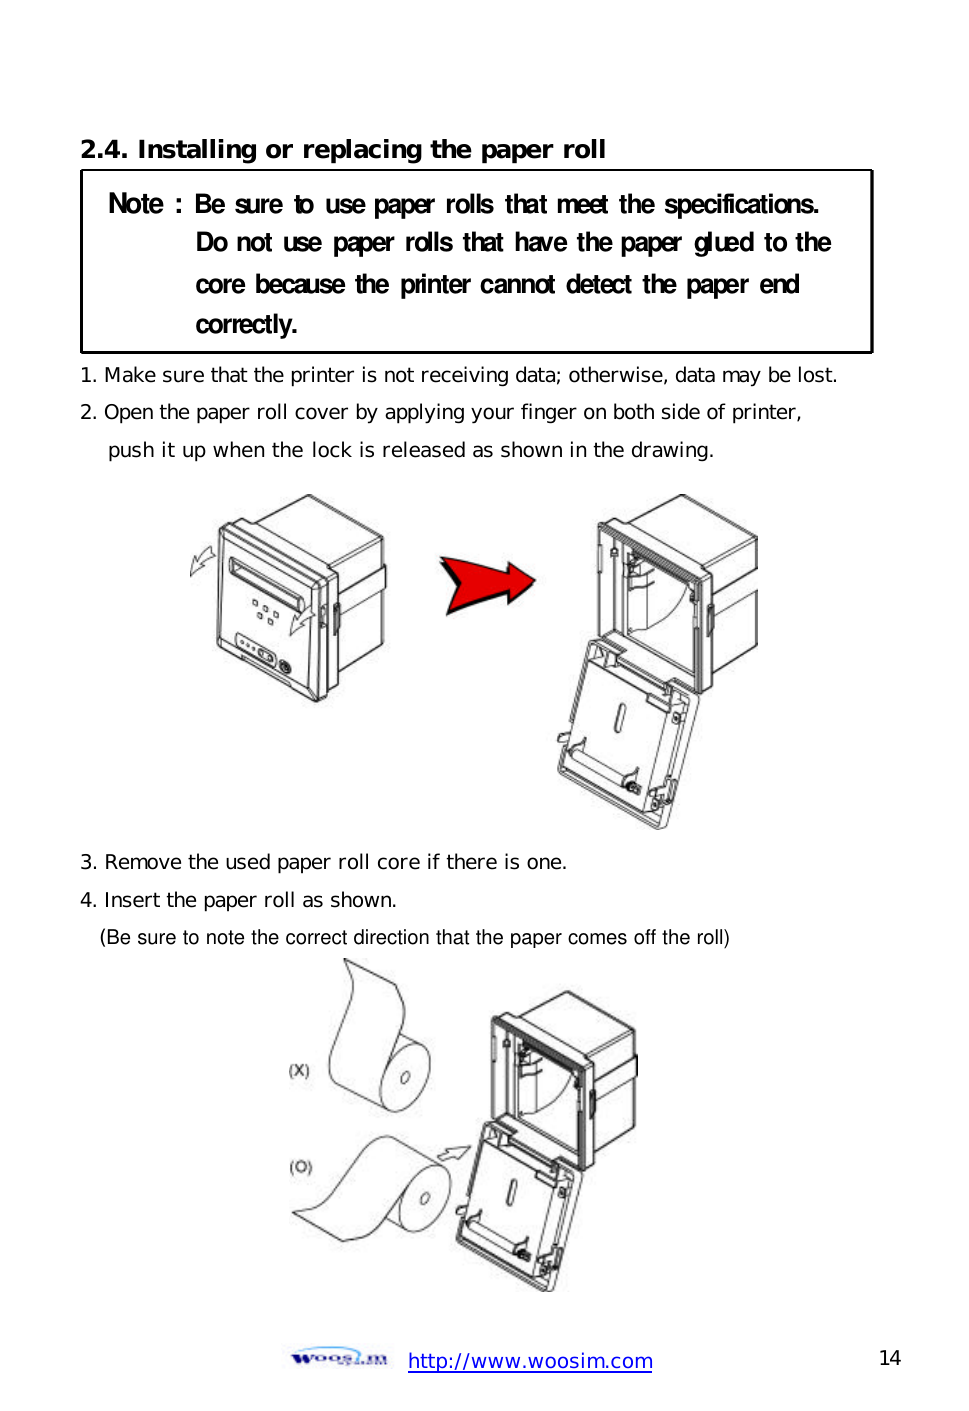  http://www.woosim.com 14                                2.4. Installing or replacing the paper roll Note:Be sureto use paper rollsthatmeet the specifications.Do notuse paper rollsthathave thepapergluedtothecorebecause theprintercannotdetect thepaperendcorrectly. 1. Make sure that the printer is not receiving data; otherwise, data may be lost. 2. Open the paper roll cover by applying your finger on both side of printer,     push it up when the lock is released as shown in the drawing.           3. Remove the used paper roll core if there is one. 4. Insert the paper roll as shown.   (Be sure to note the correct direction that the paper comes off the roll) 